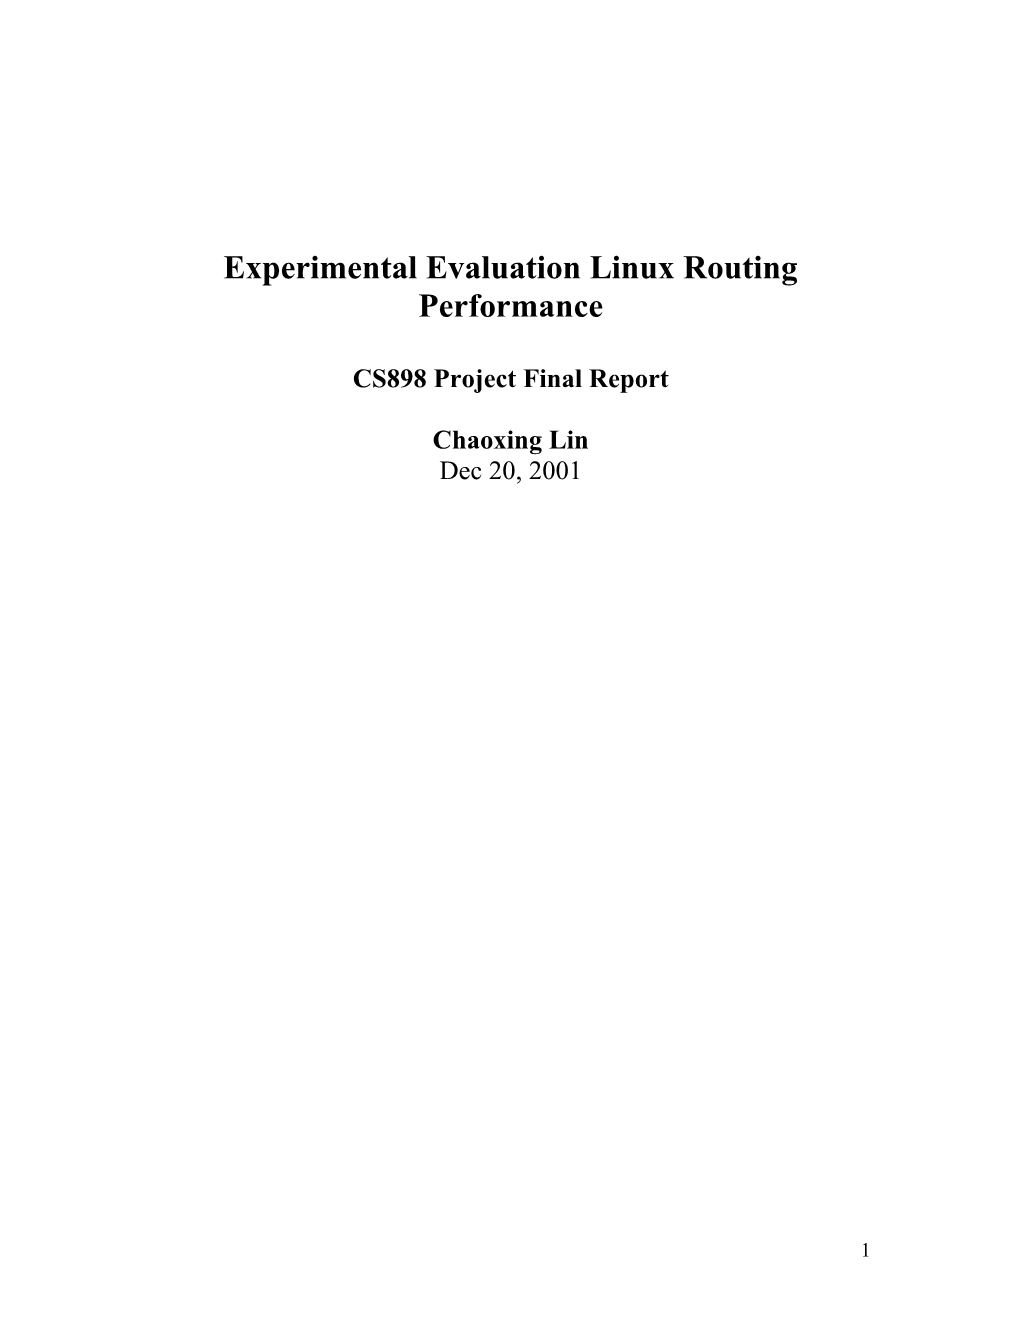 Experimental Evaluation Linux Routing Performance